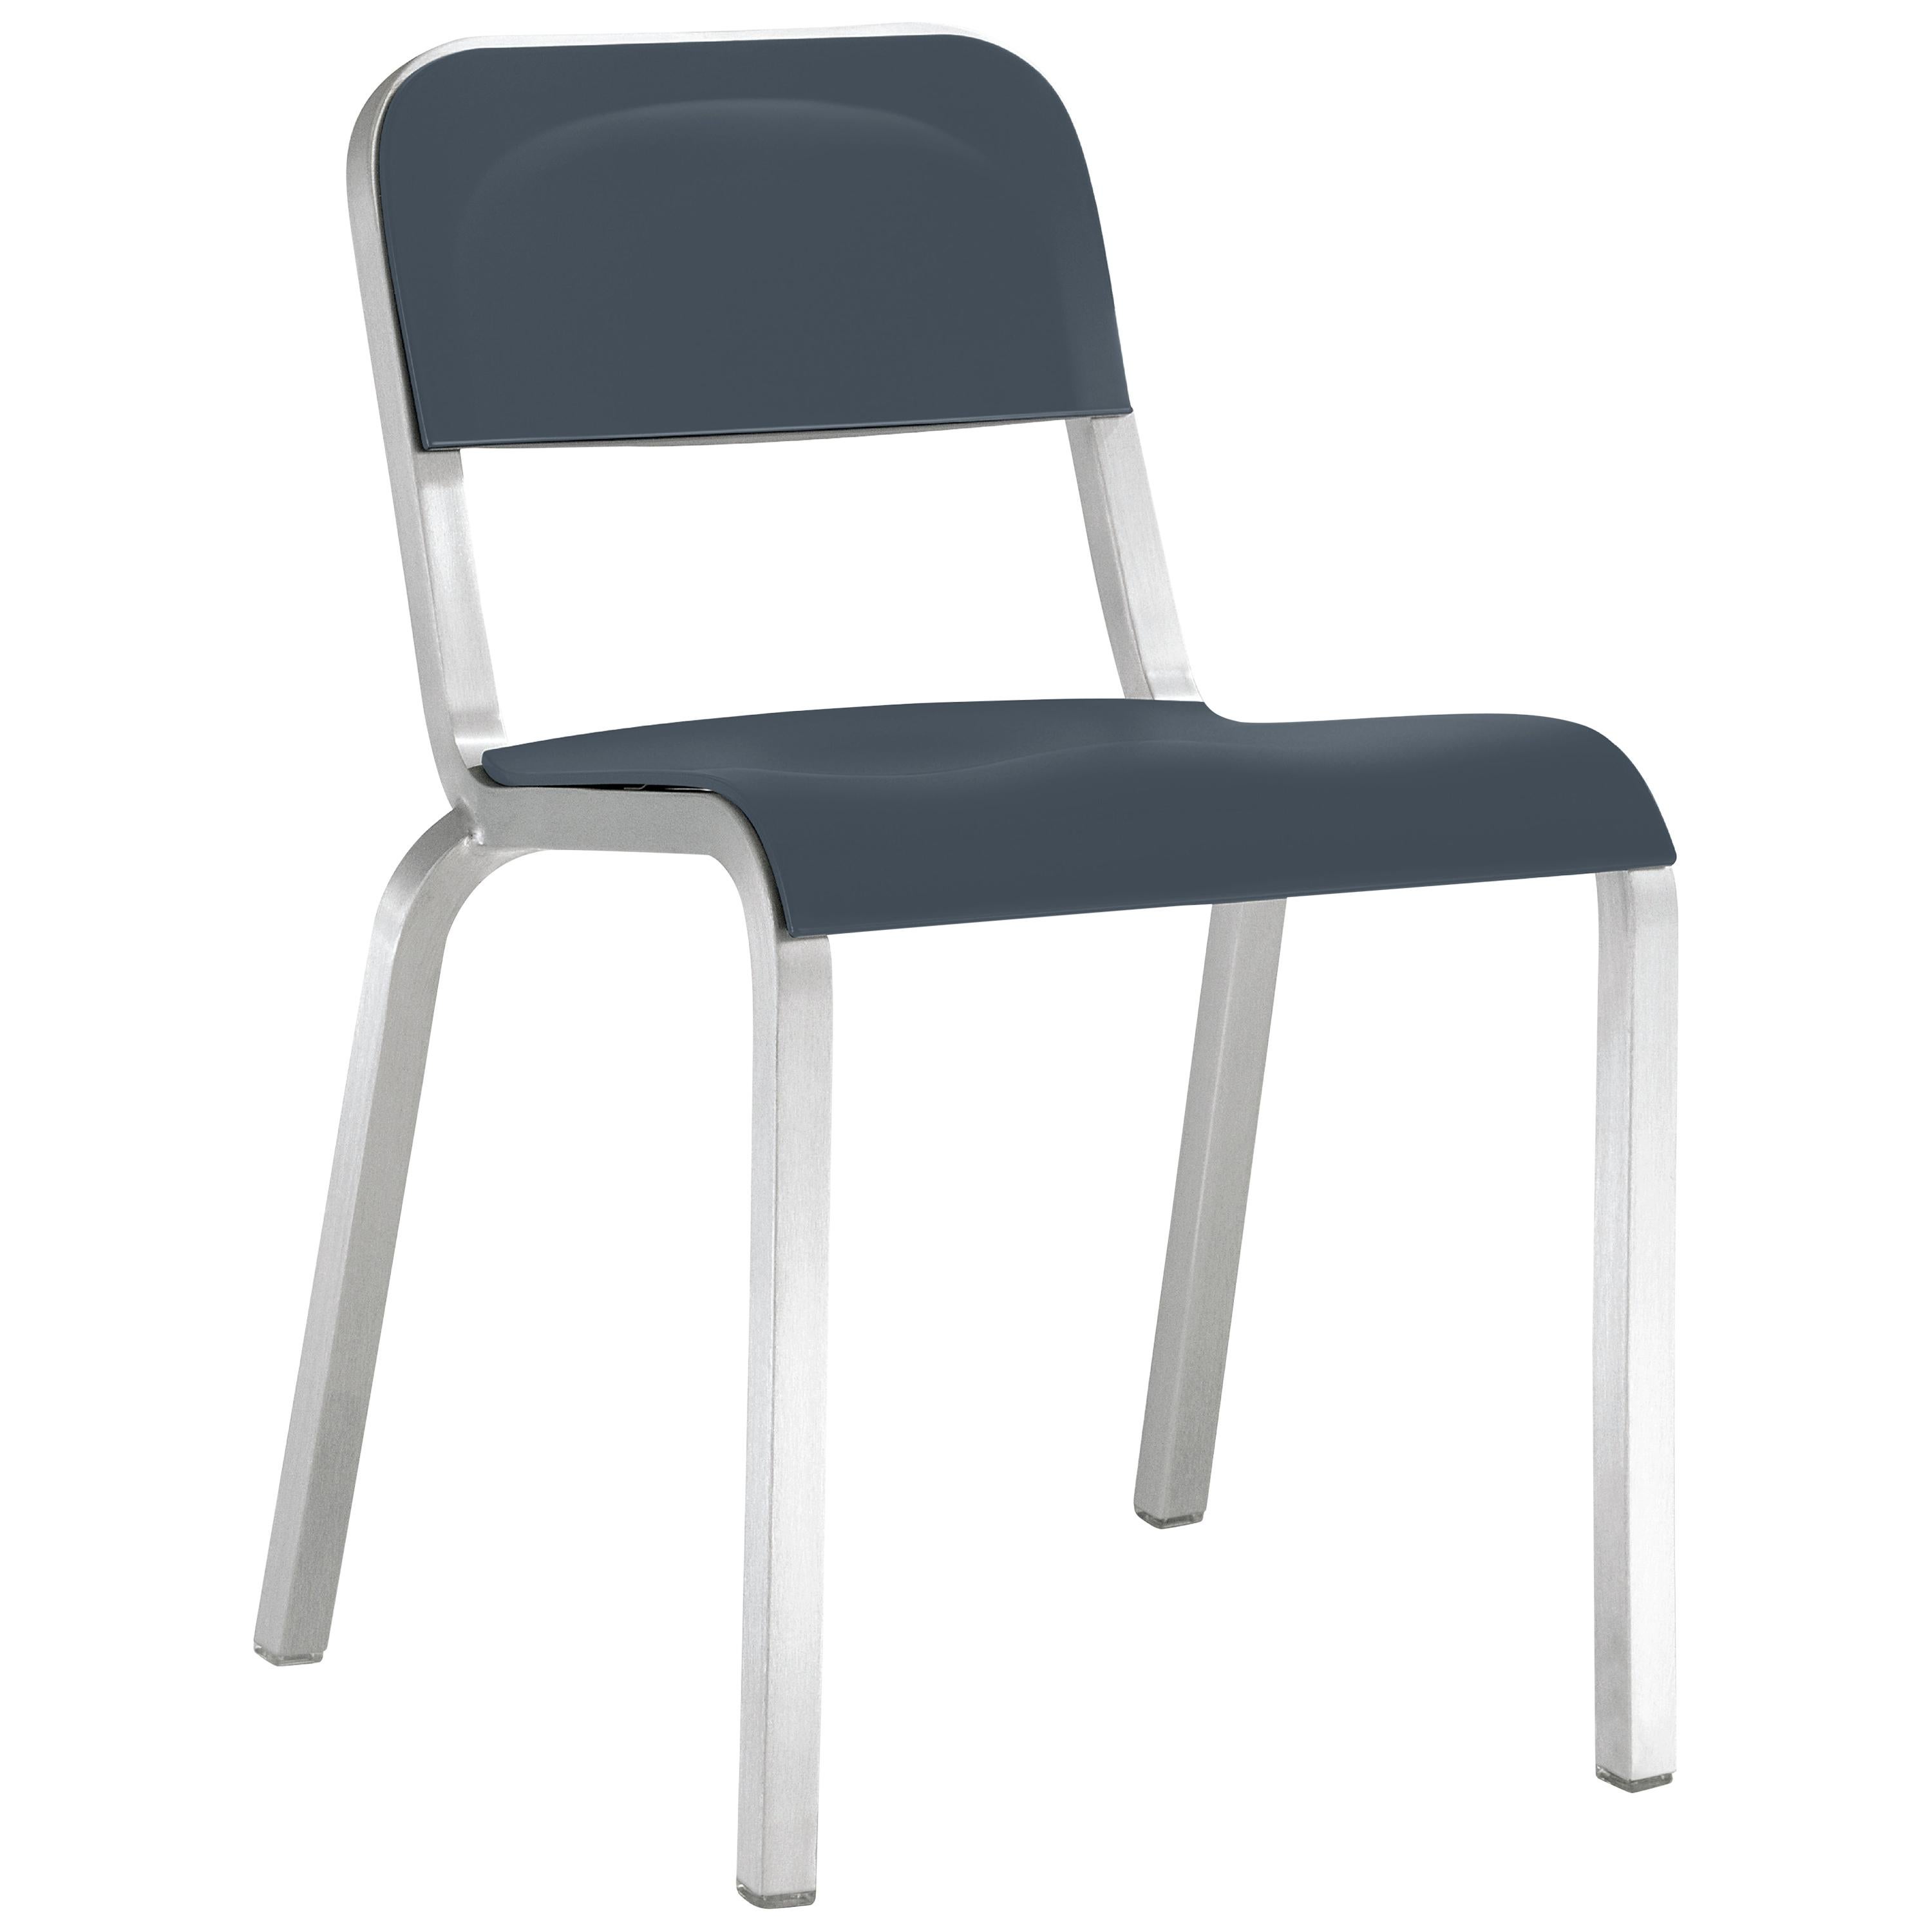 Emeco 1951 Aluminum Stacking Chair with Dark Blue Seat by Adrian Van Hooydonk For Sale